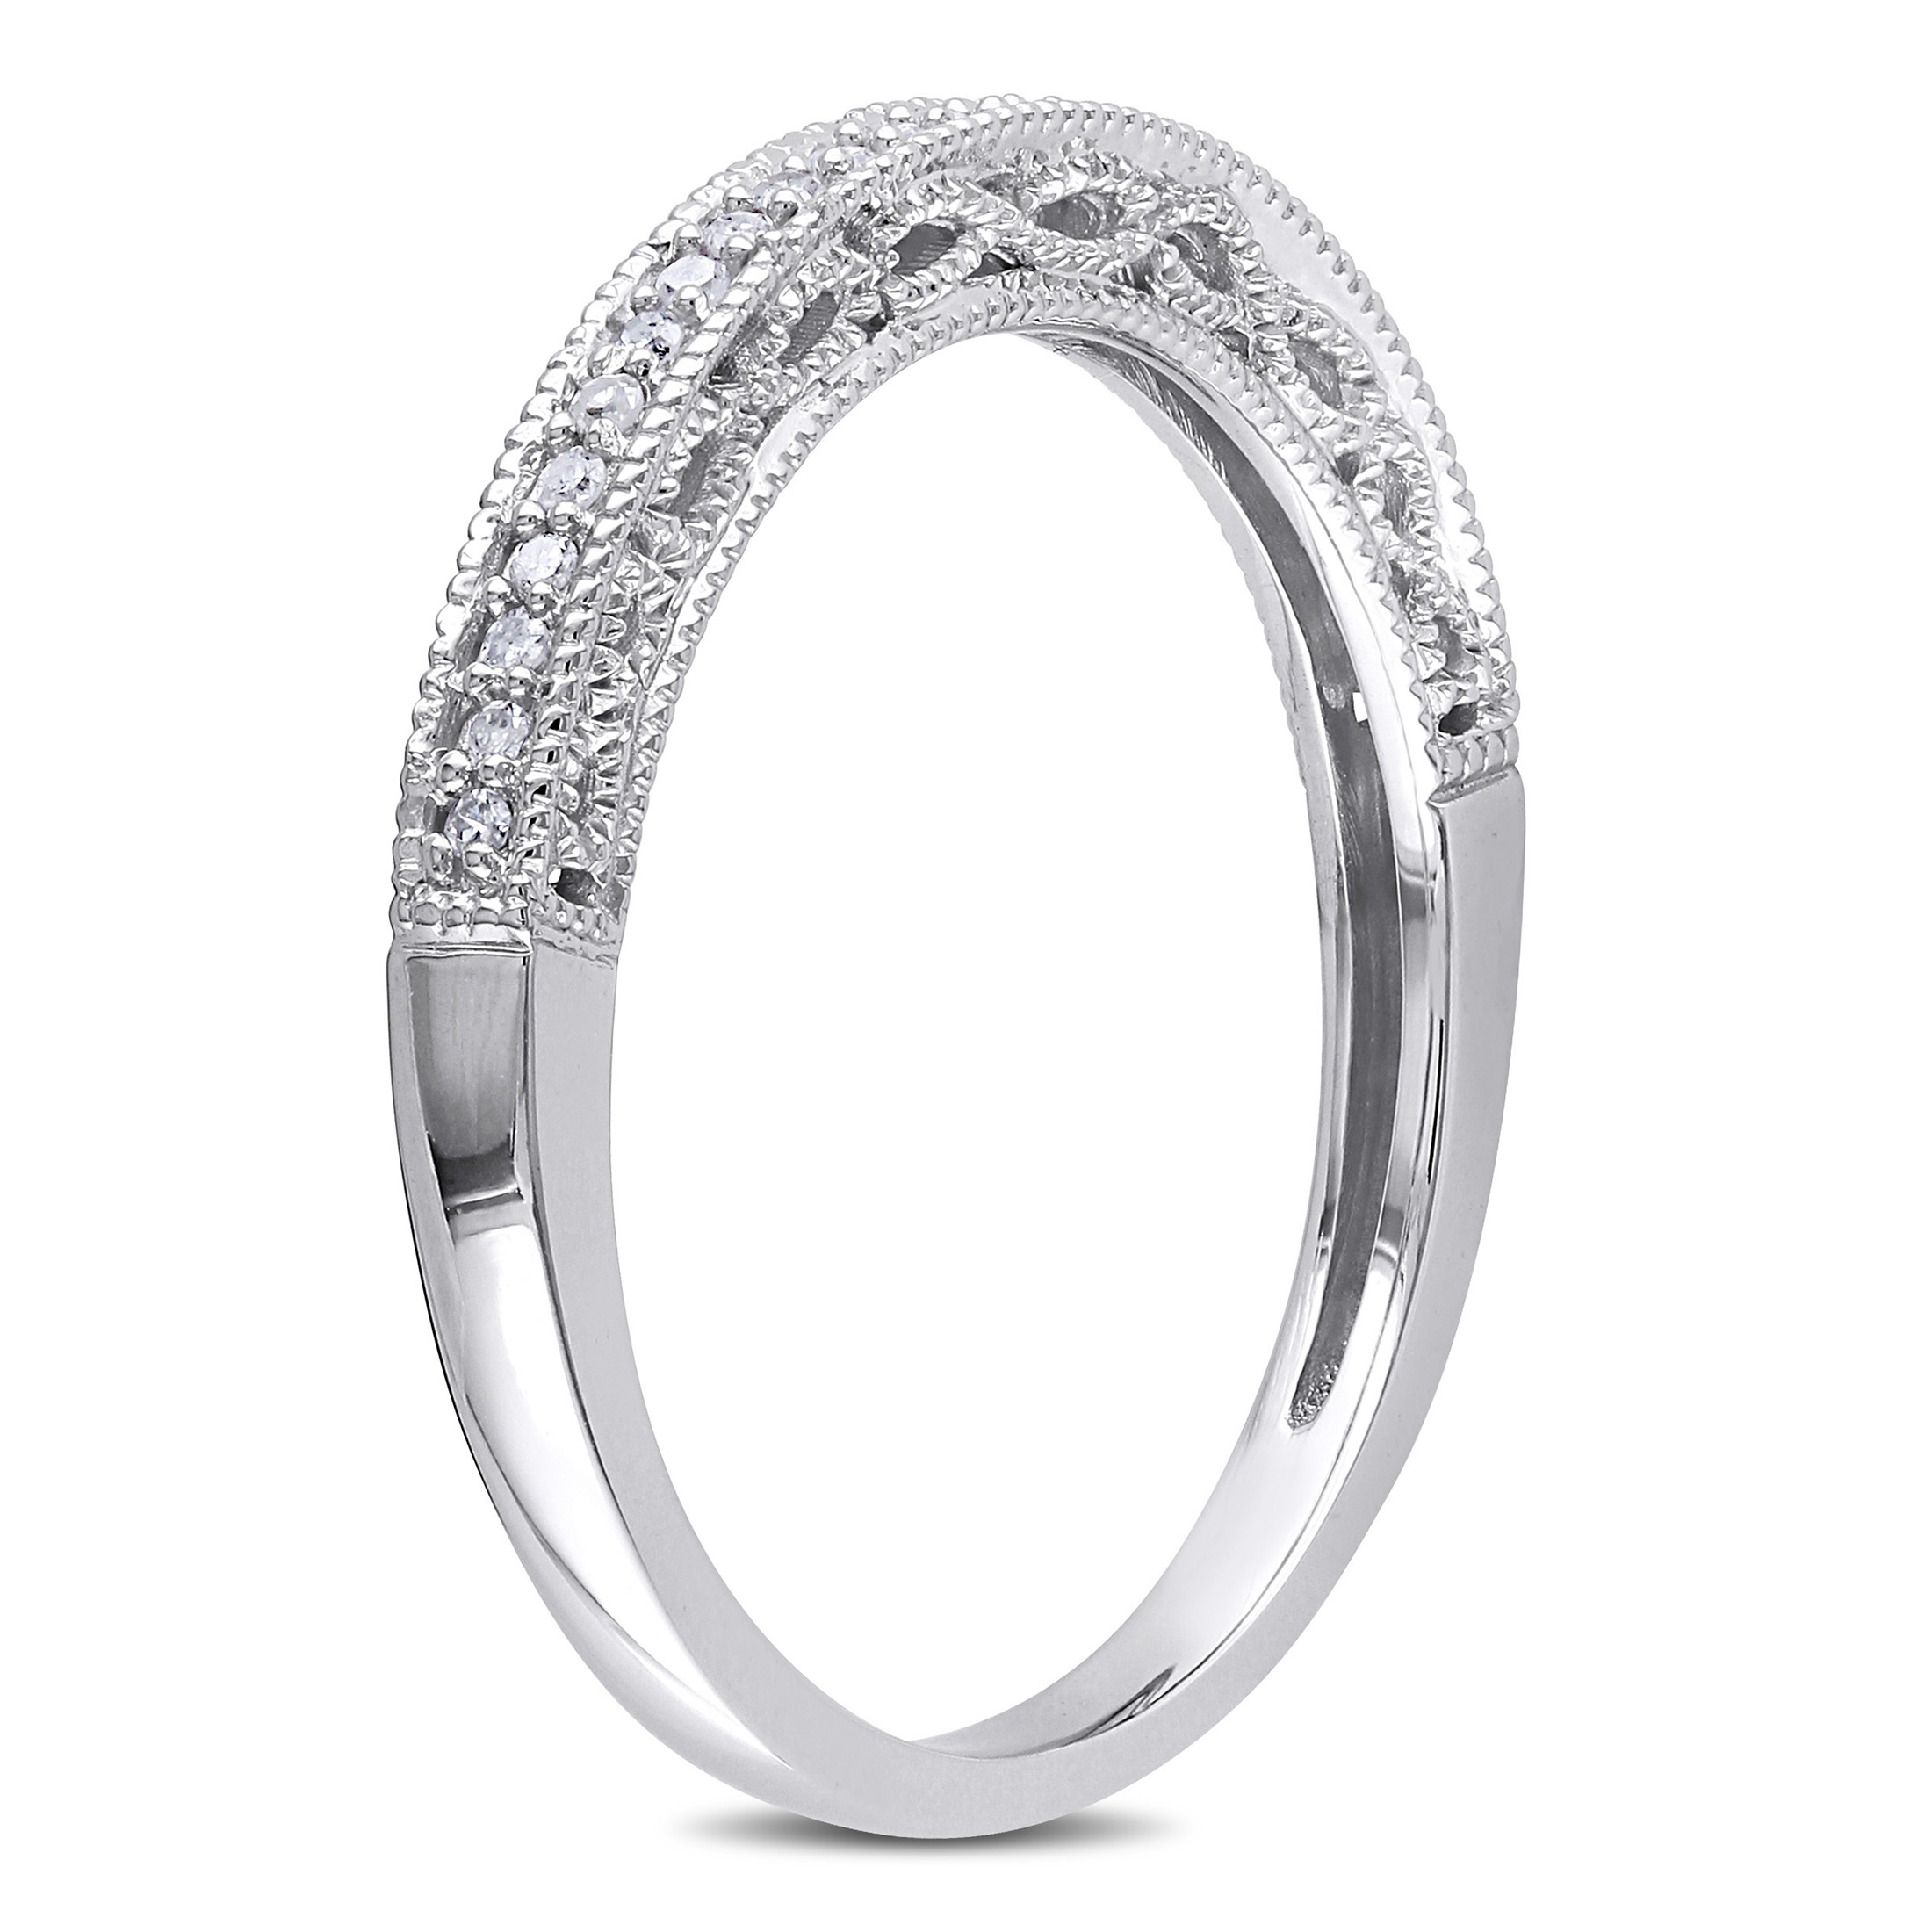 Everly Women's Bridal Engagement Anniversary 1/10 CT T.W. Round-Cut Diamond 10kt White Gold Semi-Eternity Ring with Milgrain Detail and Pave Setting (G-H, I2-I3) - image 4 of 9